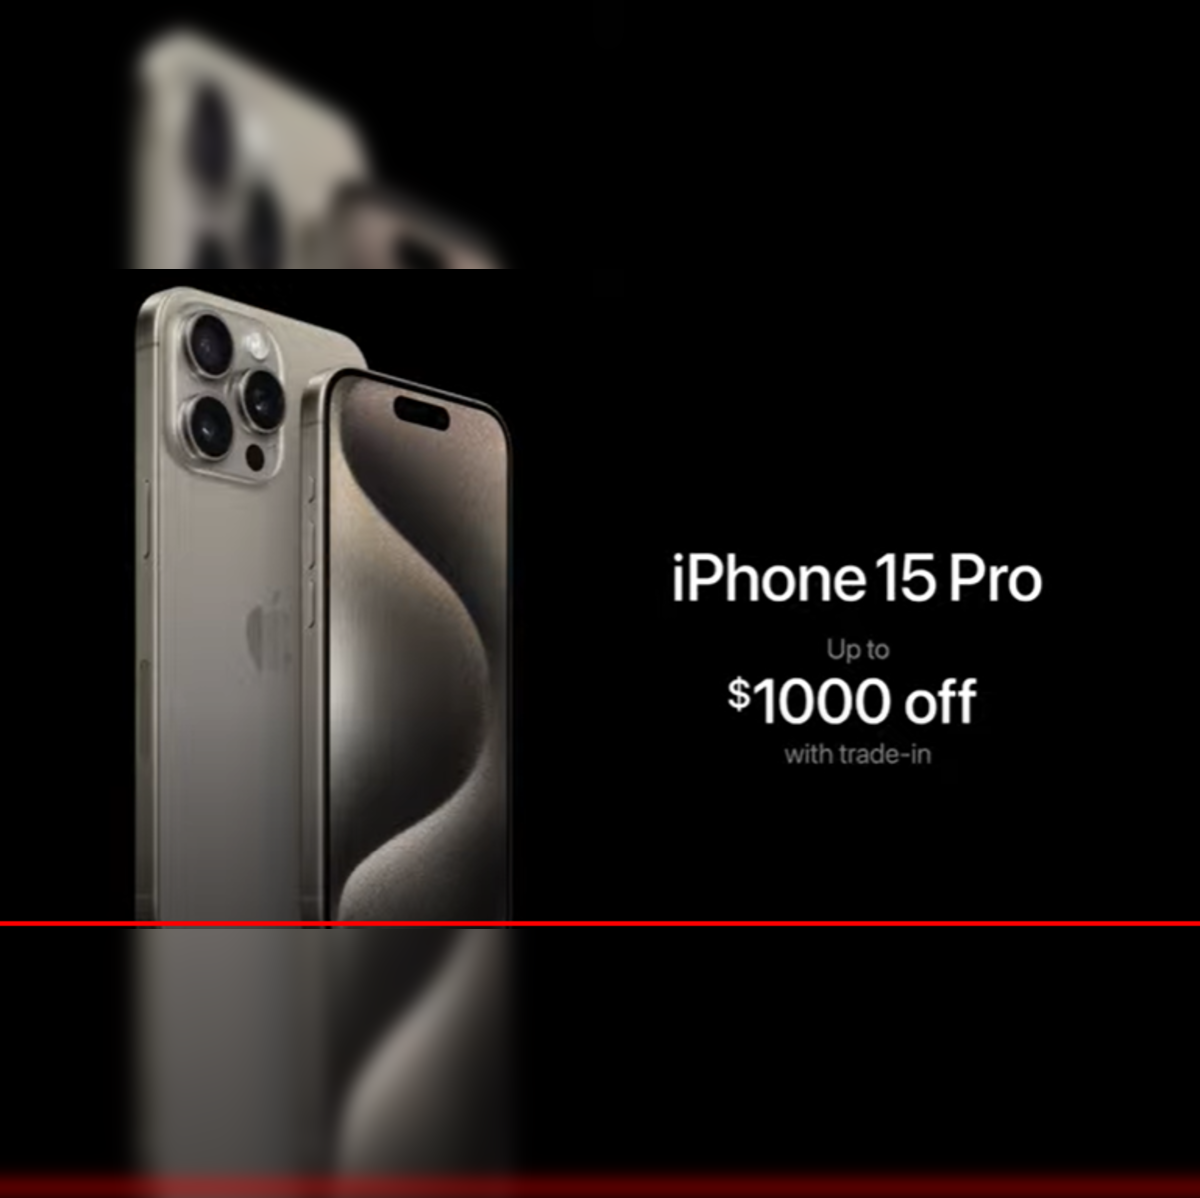 india: Huge price gap greys the market for iPhone 15 Pro models in